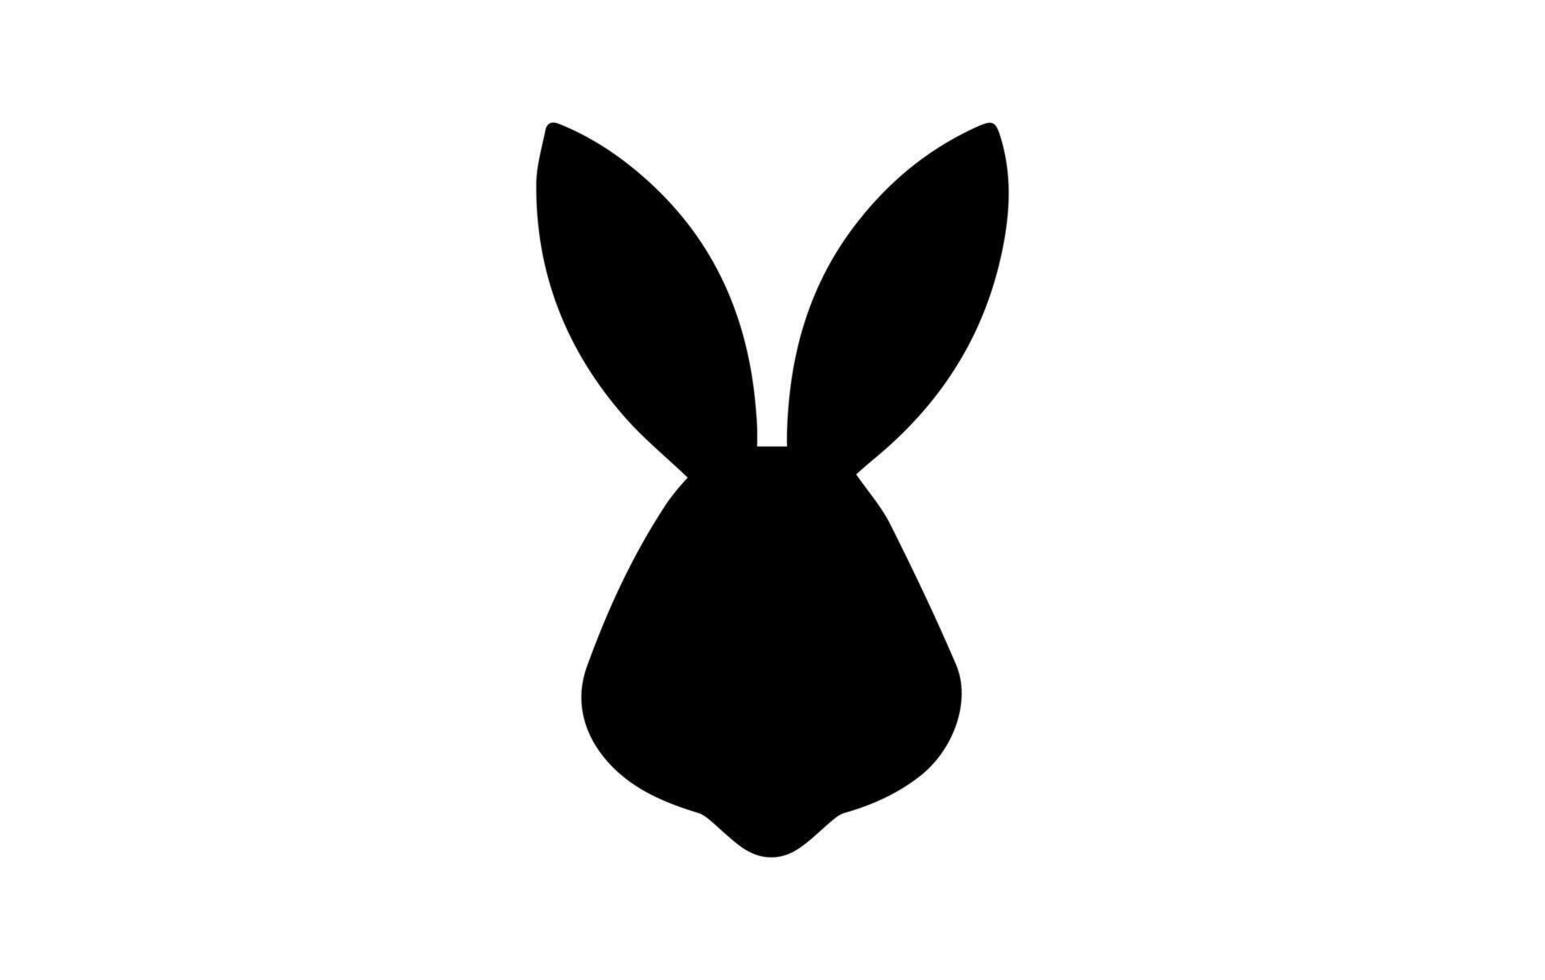 Silhouette of a rabbit head. Easter Bunny. Isolated on white background. A simple black icon of hare. Cute animal. Ideal for logo, emblem, pictogram, print, design element for greeting card, vector